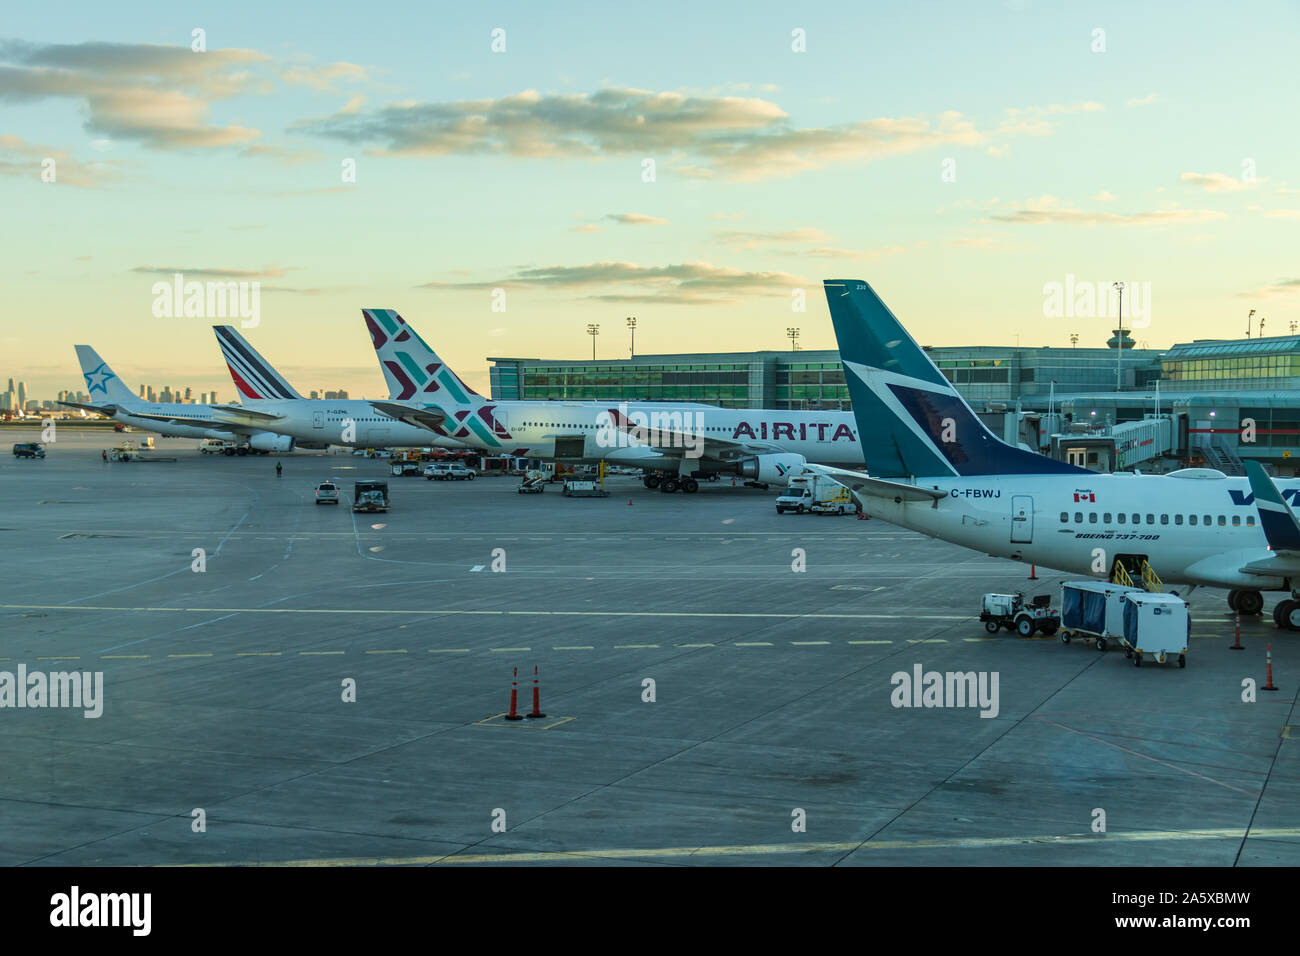 Four aircraft docked at gates at Toronto Pearson Intl. Airport, Terminal 1 during a beautiful sunset. Stock Photo